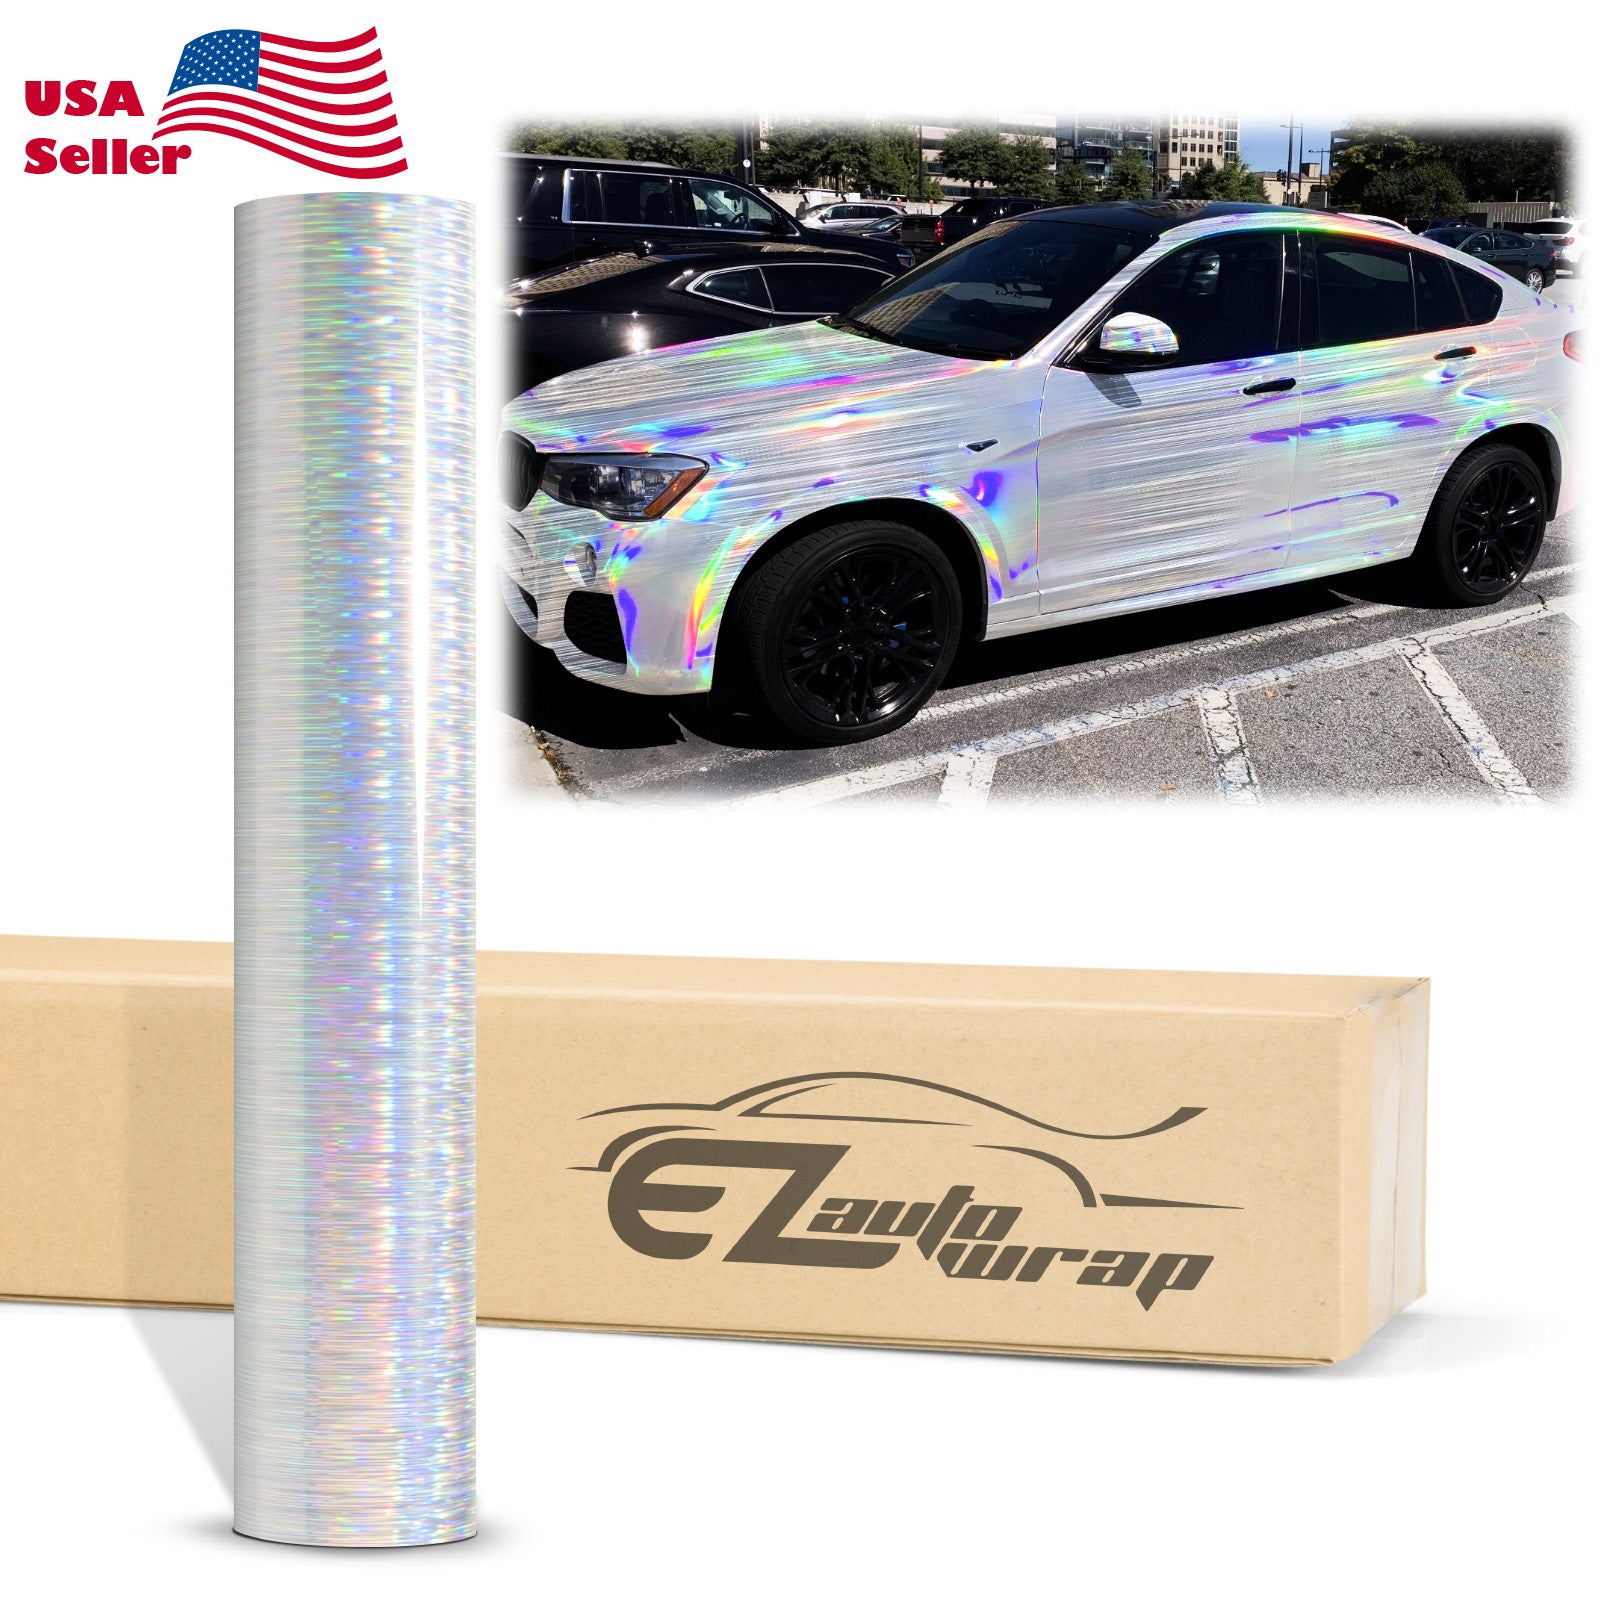 12 x 60 Silver Brushed Aluminum Vinyl Film Wrap Sticker Decal Air Bubble  Free